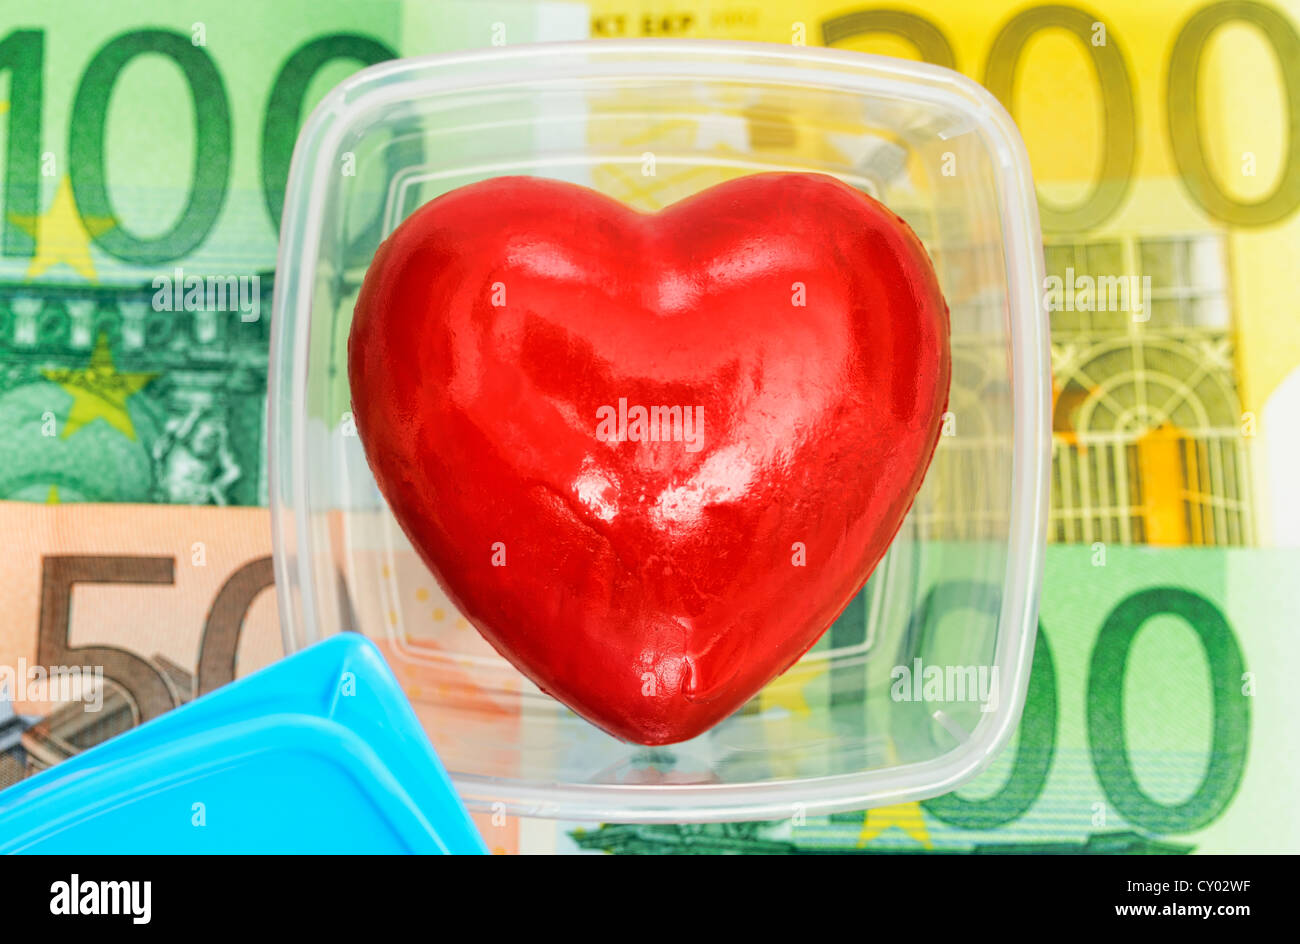 Heart in food storage container with bank notes, symbolic image organ trade Stock Photo